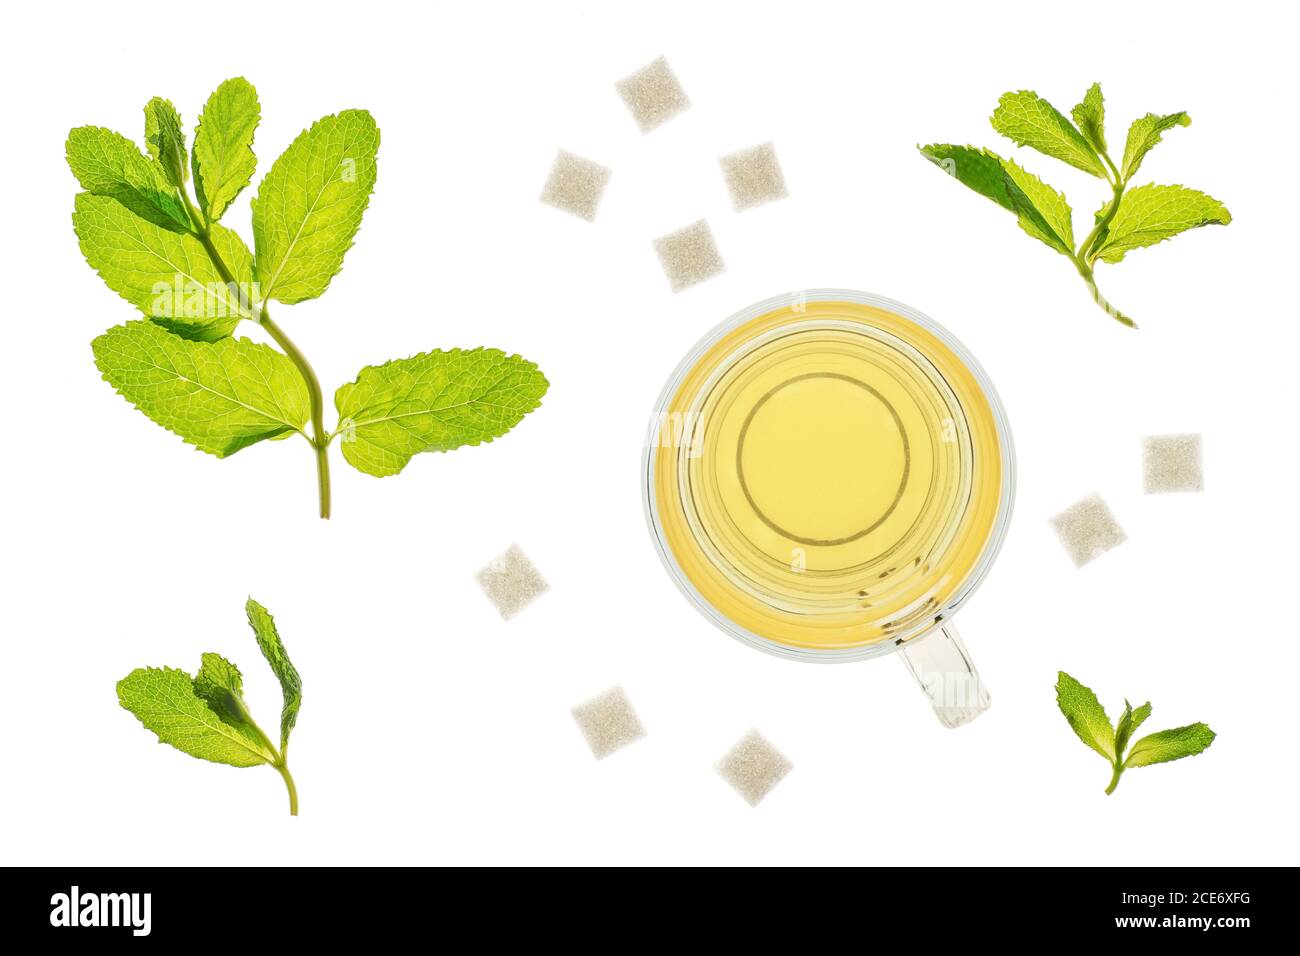 Glass of mint tea with fresh leaves and  sugar cubes. Isolated on a white background, backlit on a light table. Stock Photo